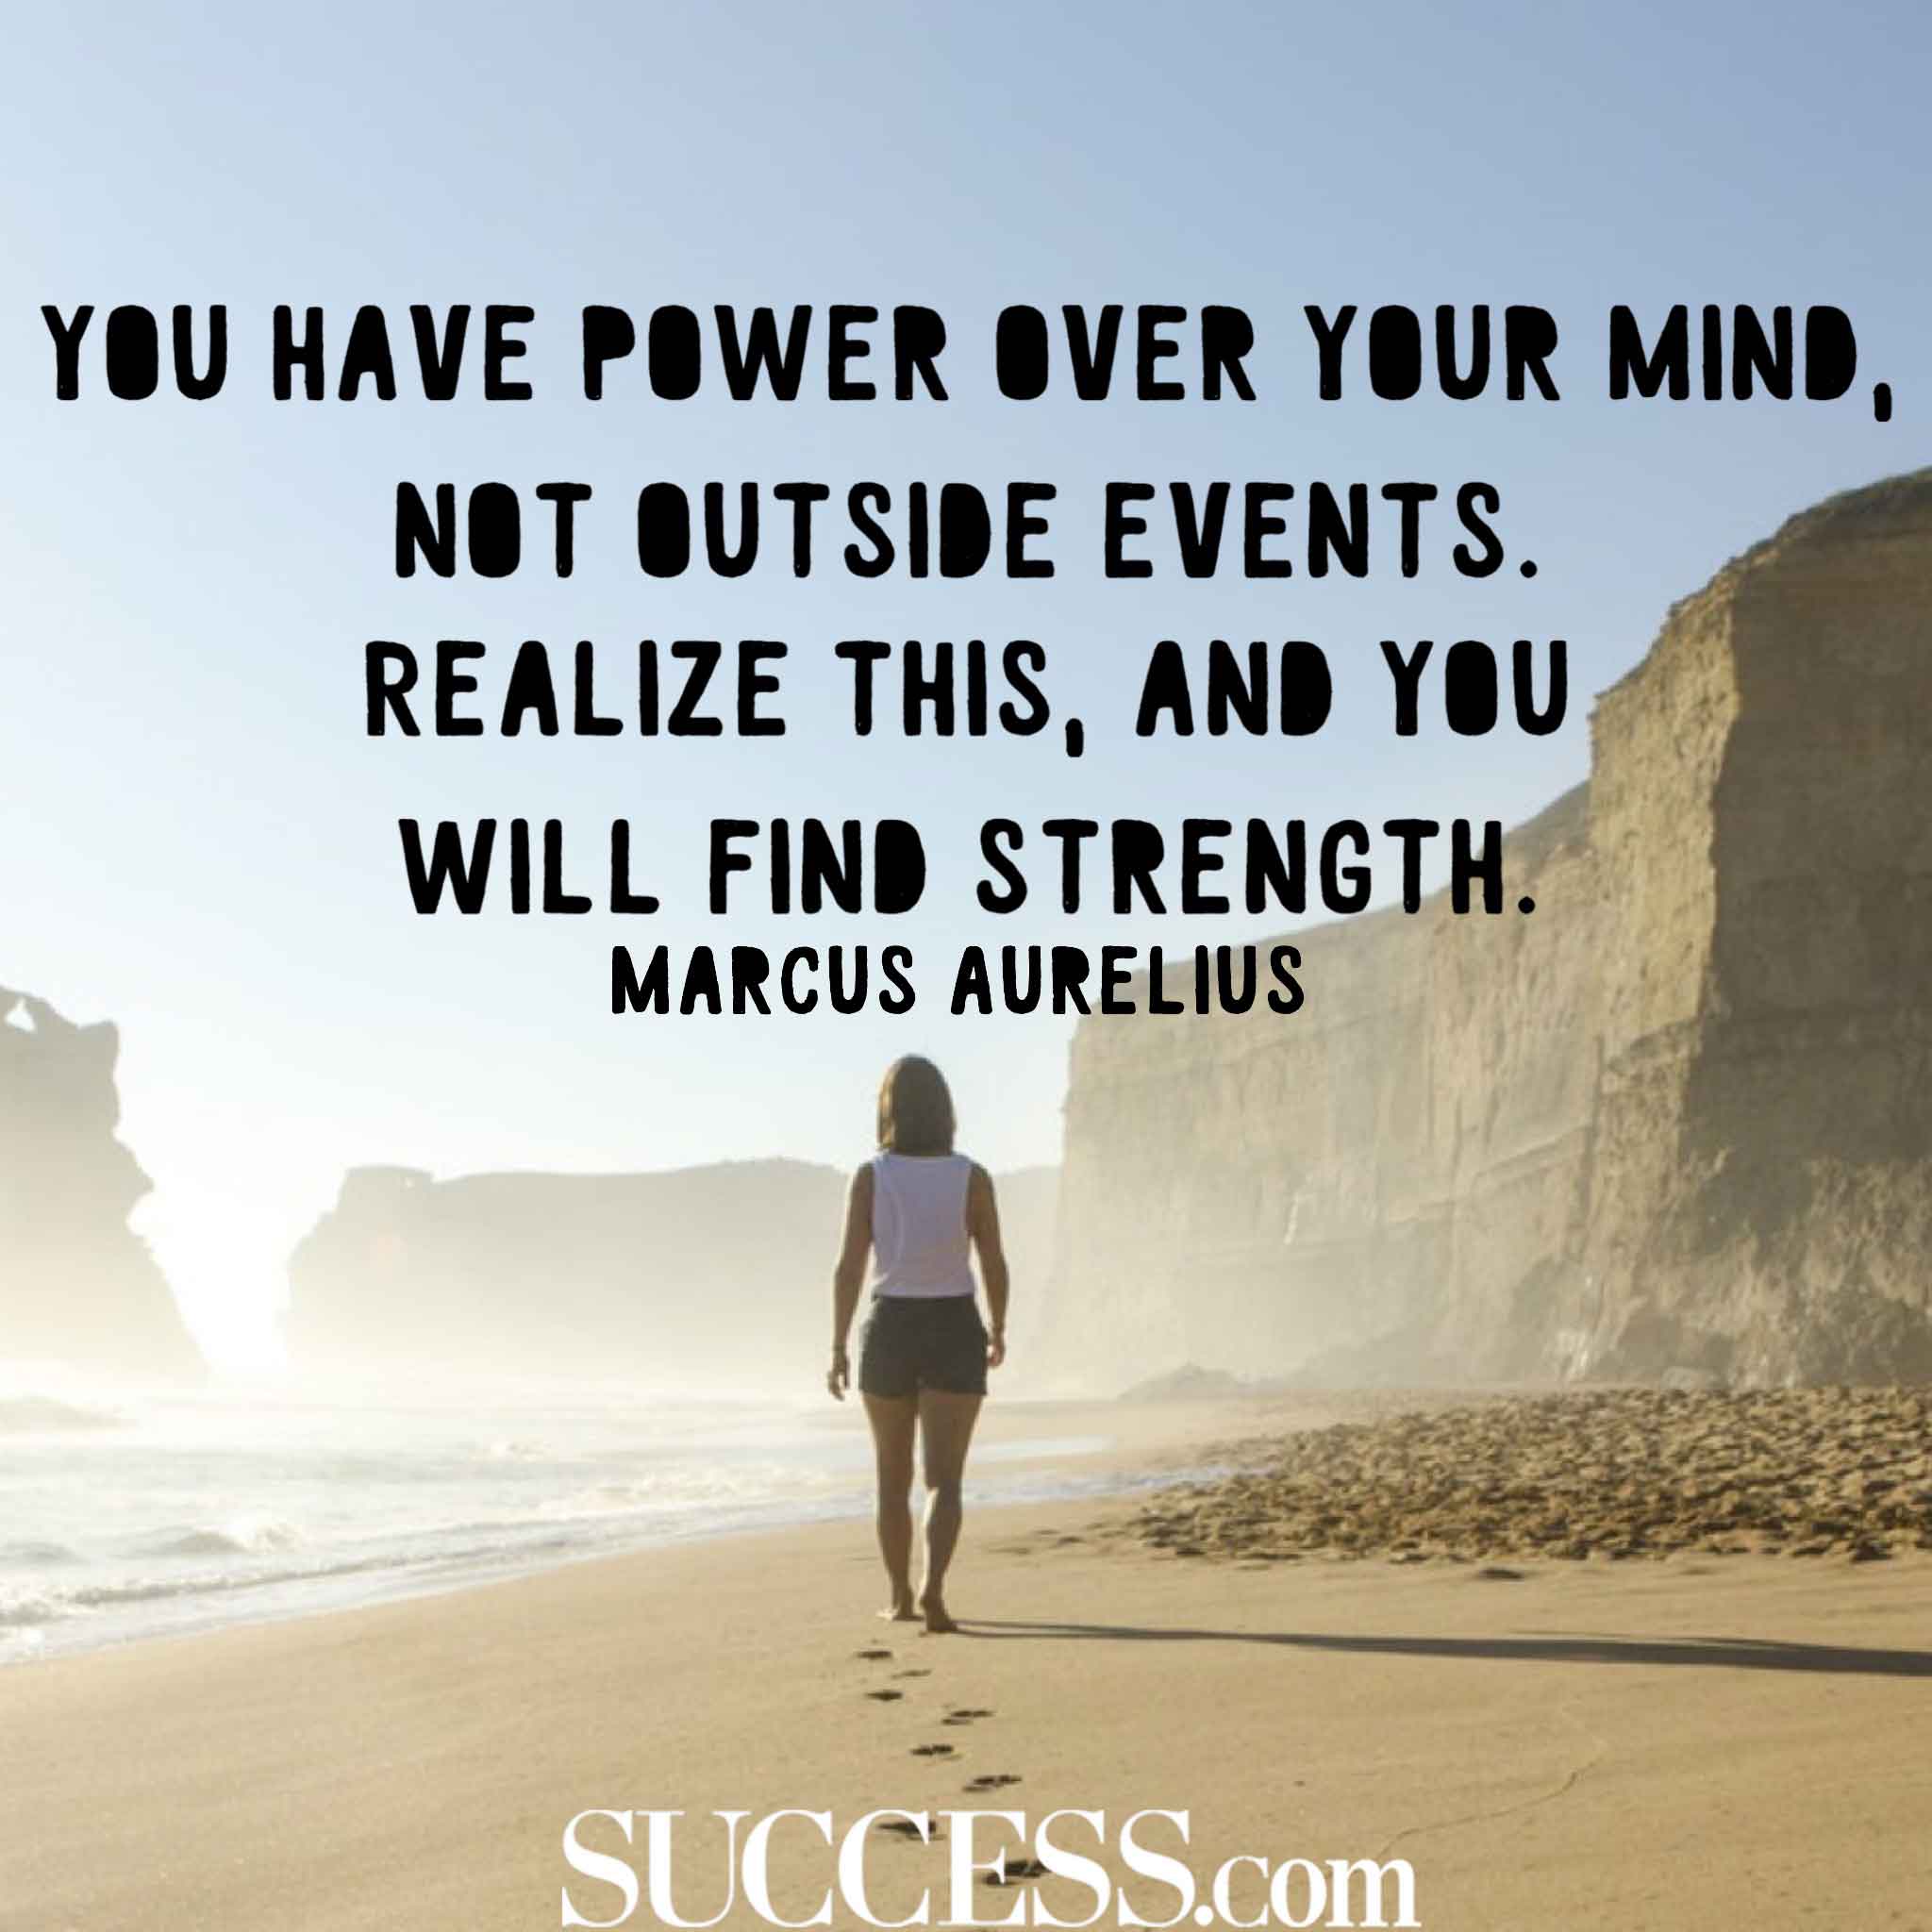 you have power over your mind, not outside events. realize this and you will find strength. marcus aurelius